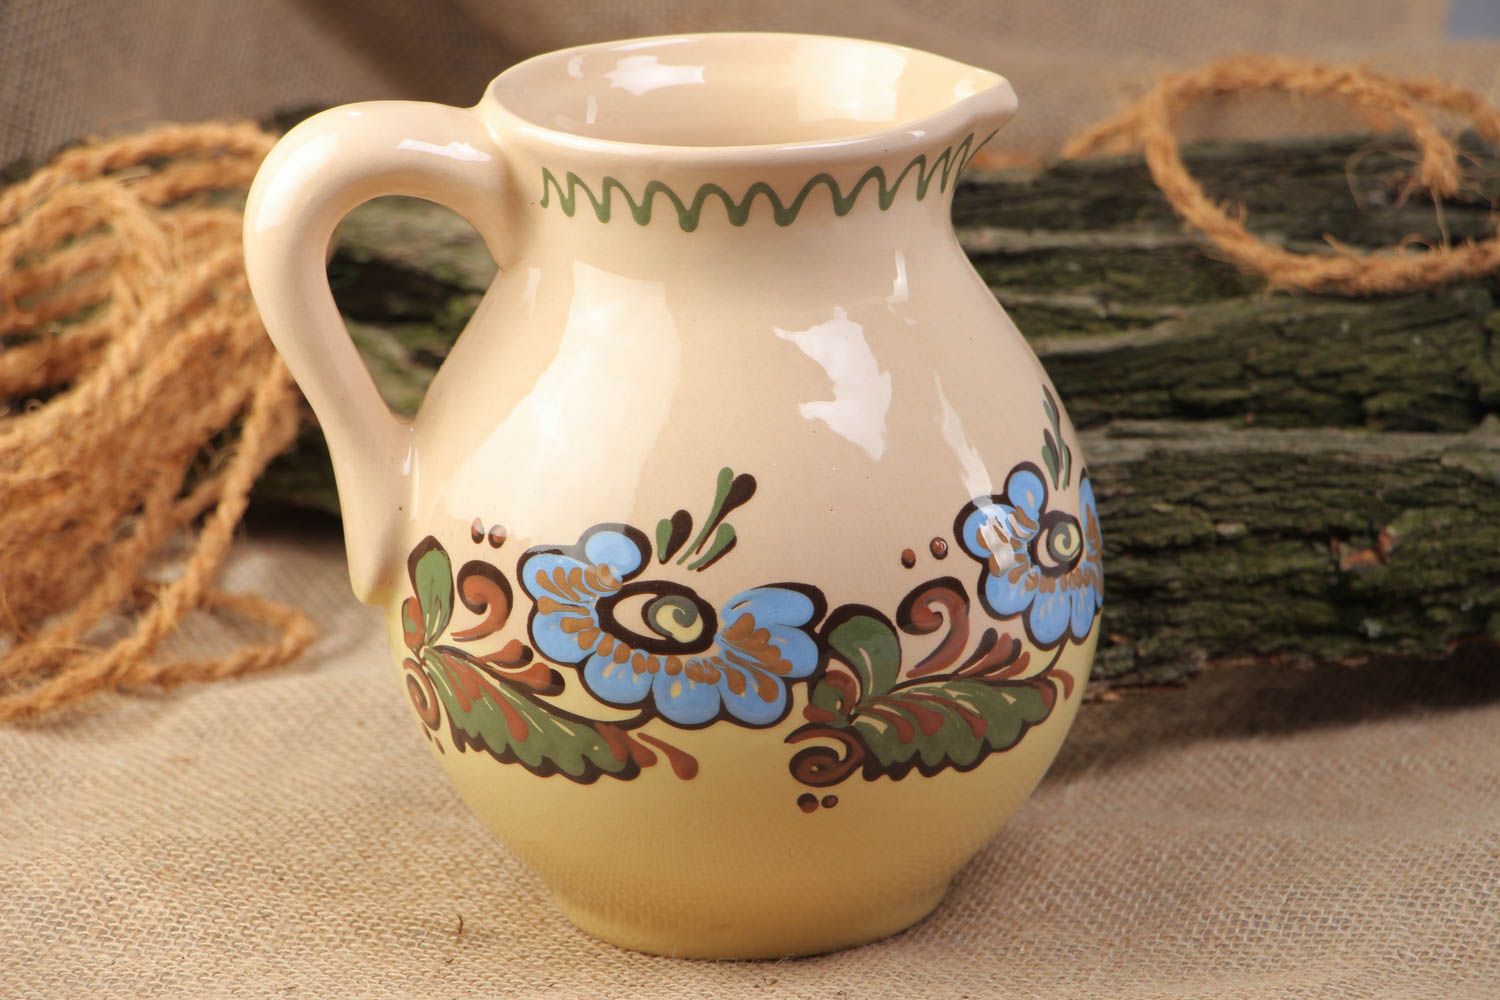 60 oz ceramic water jug with handle and floral pattern in green, beige, blue colors 1,9 lb photo 1